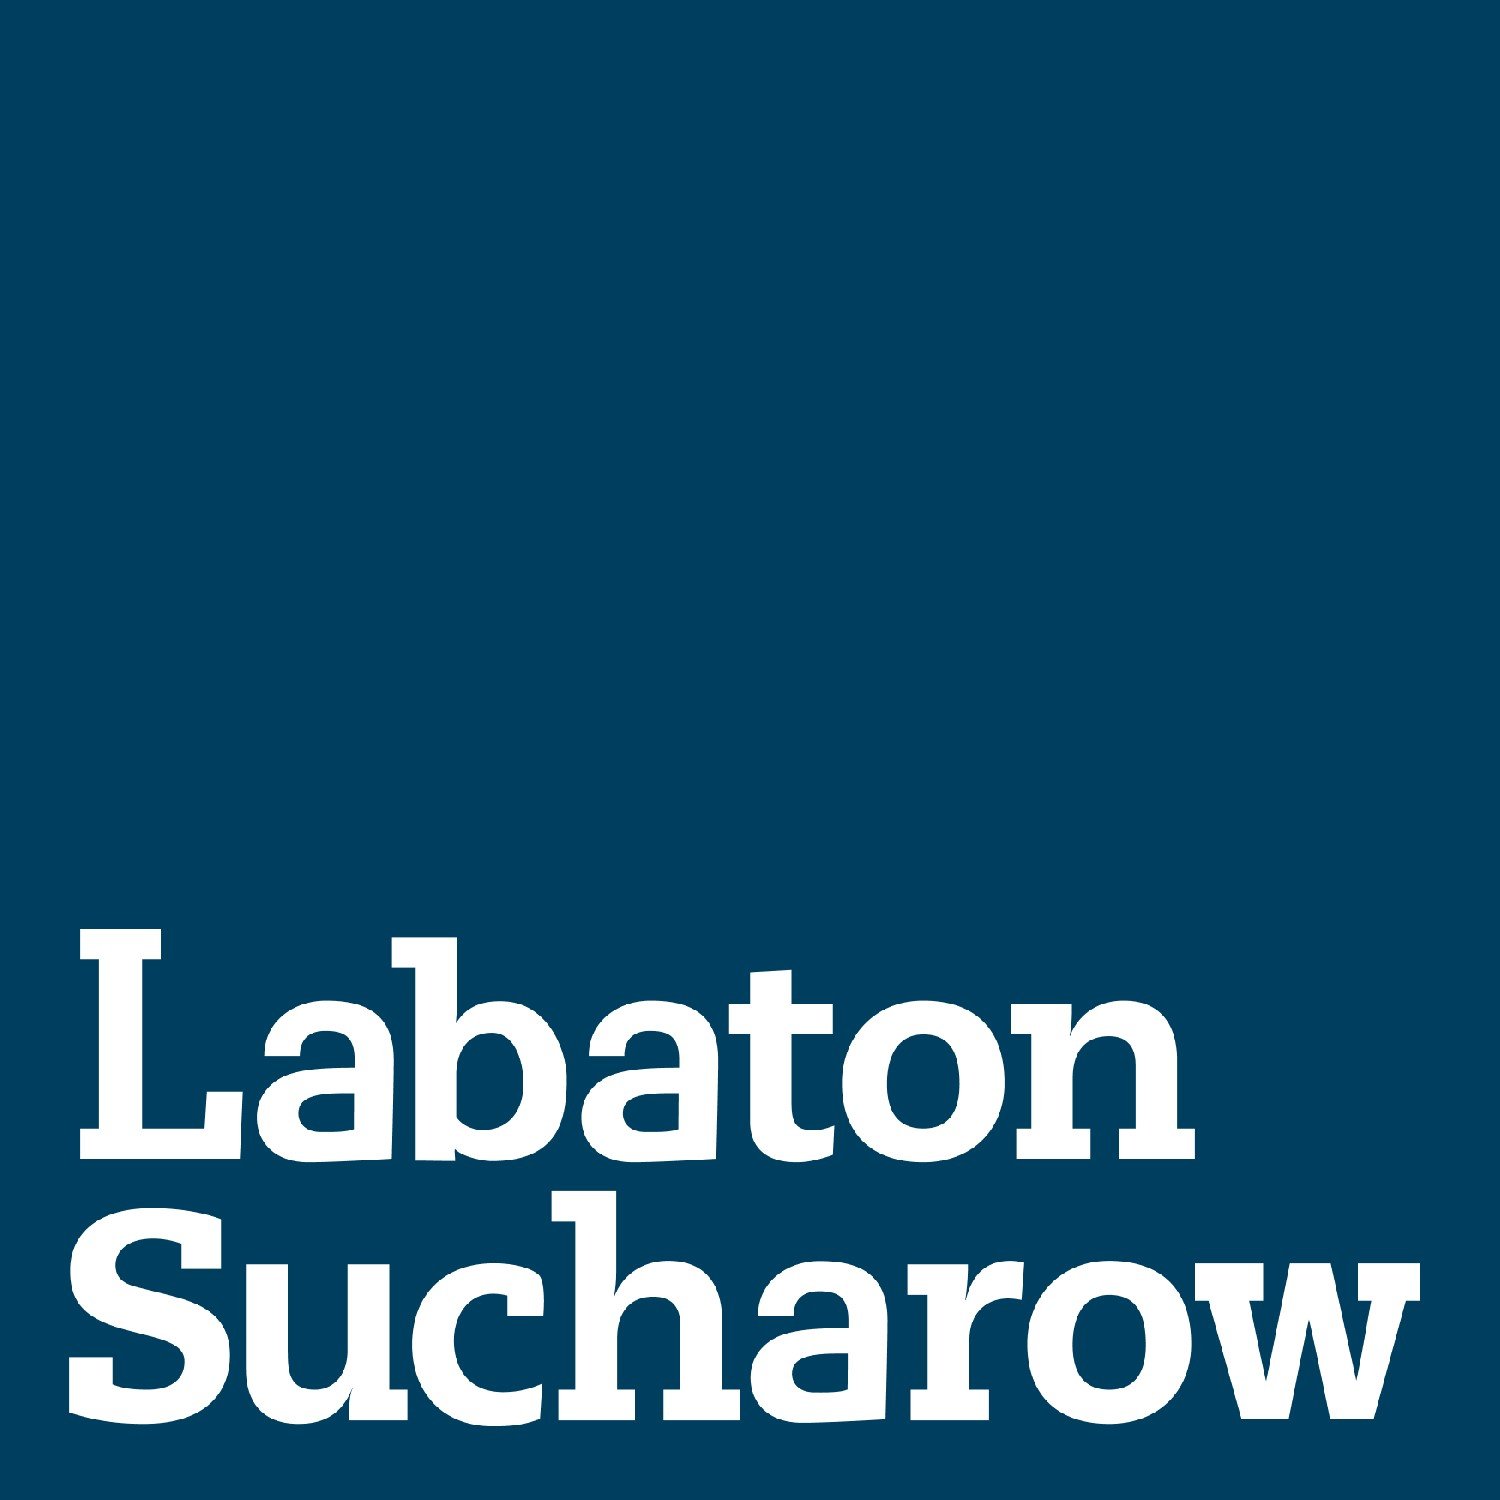 Labaton Sucharow LLP, Tuesday, July 13, 2021, Press release picture